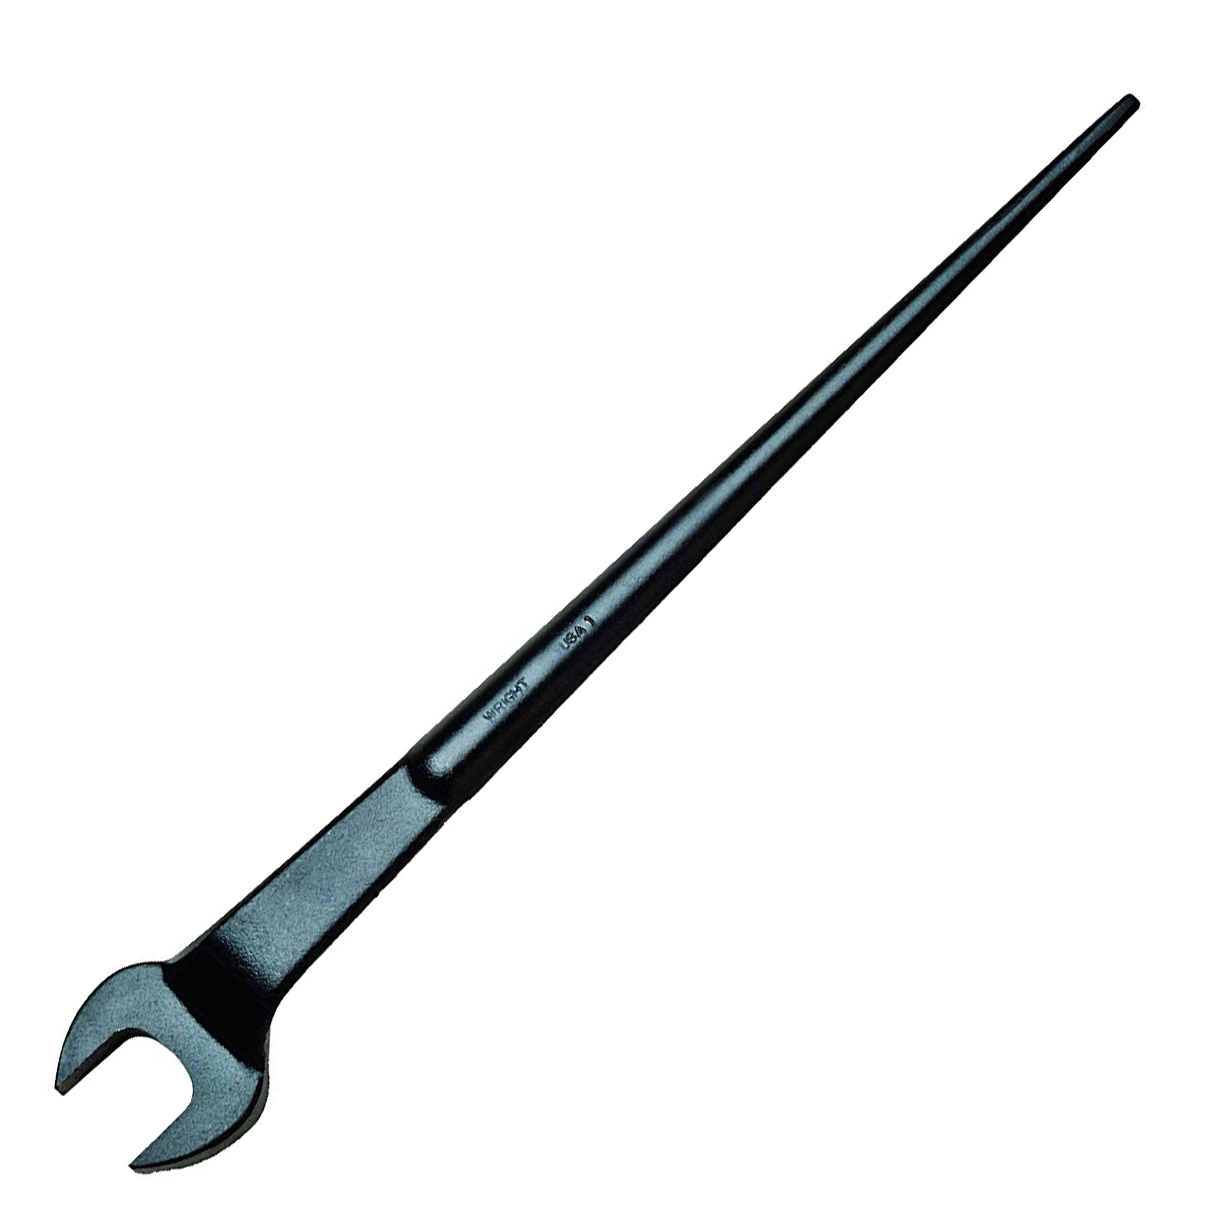 Wright 1-1/4" Structural Wrench Offset Head Black #1740 (1740WR)